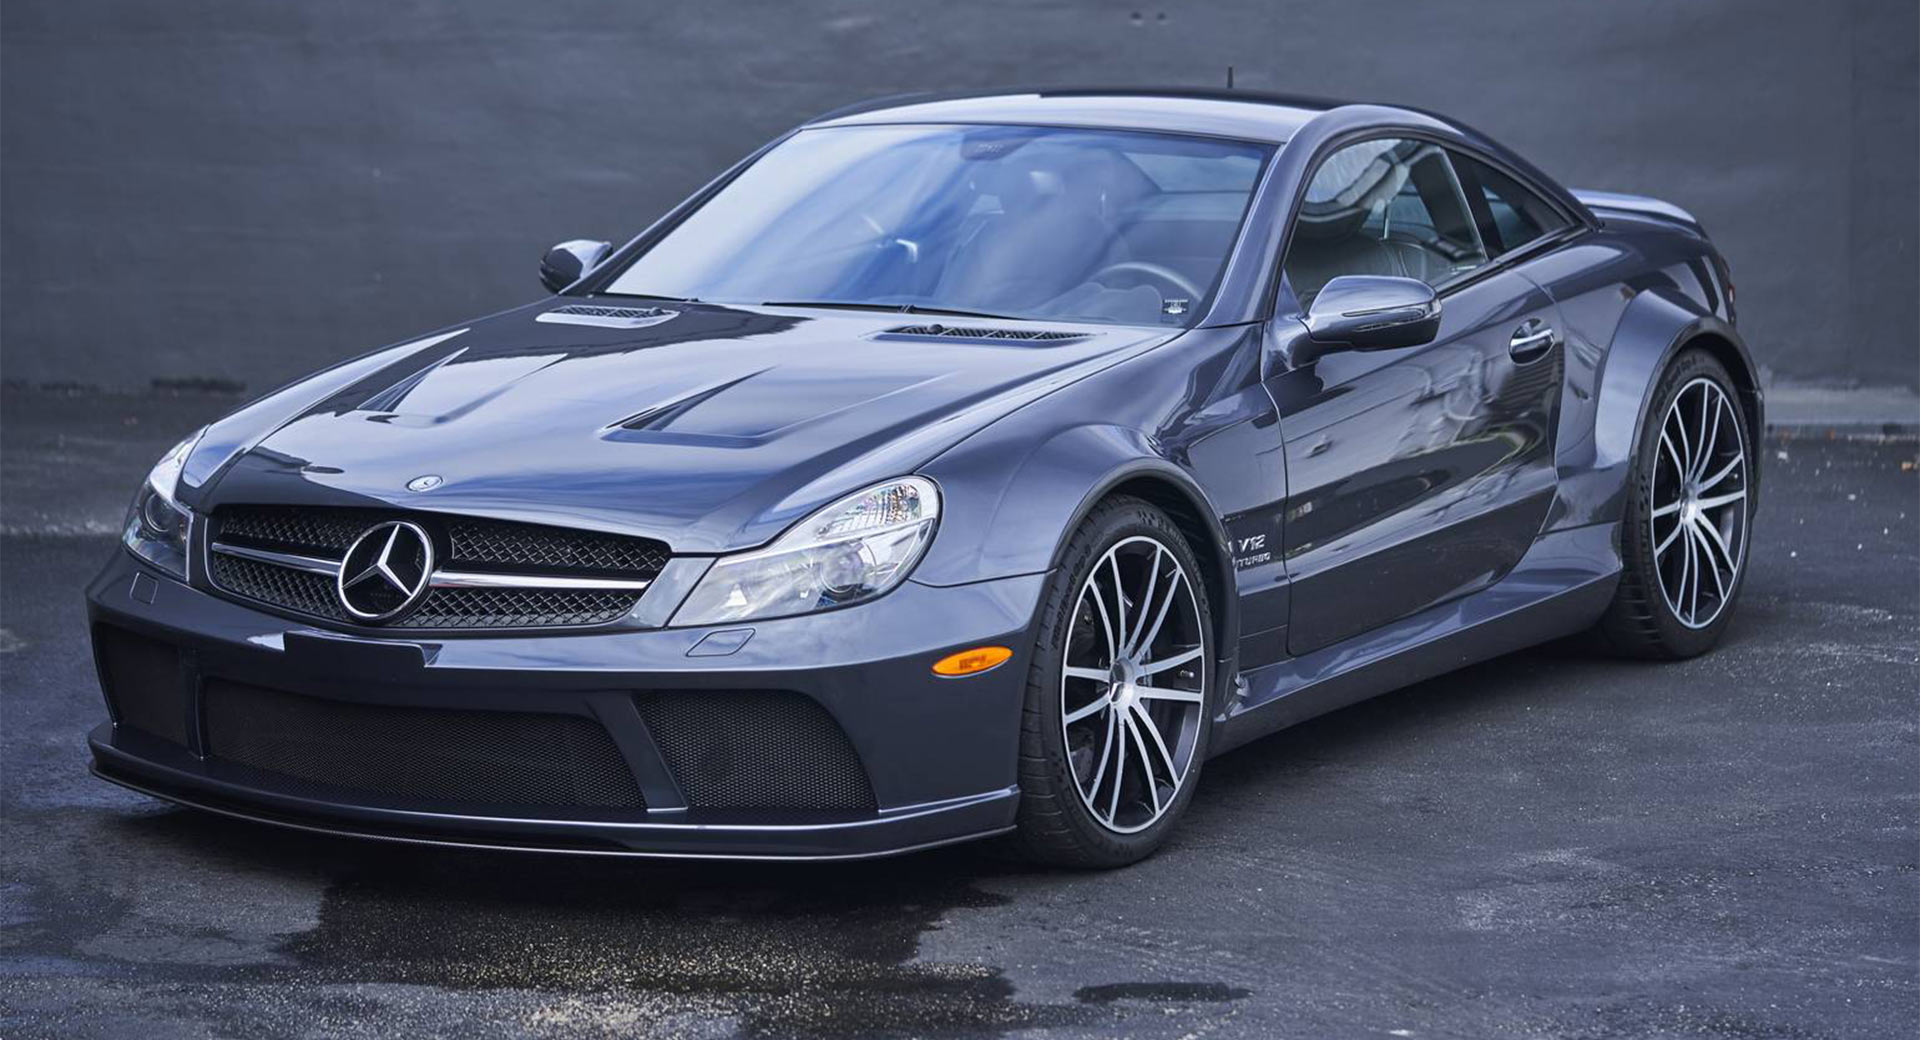 The Mercedes-Benz SL65 AMG Black Series Is An Absolute Brute Of A Car |  Carscoops